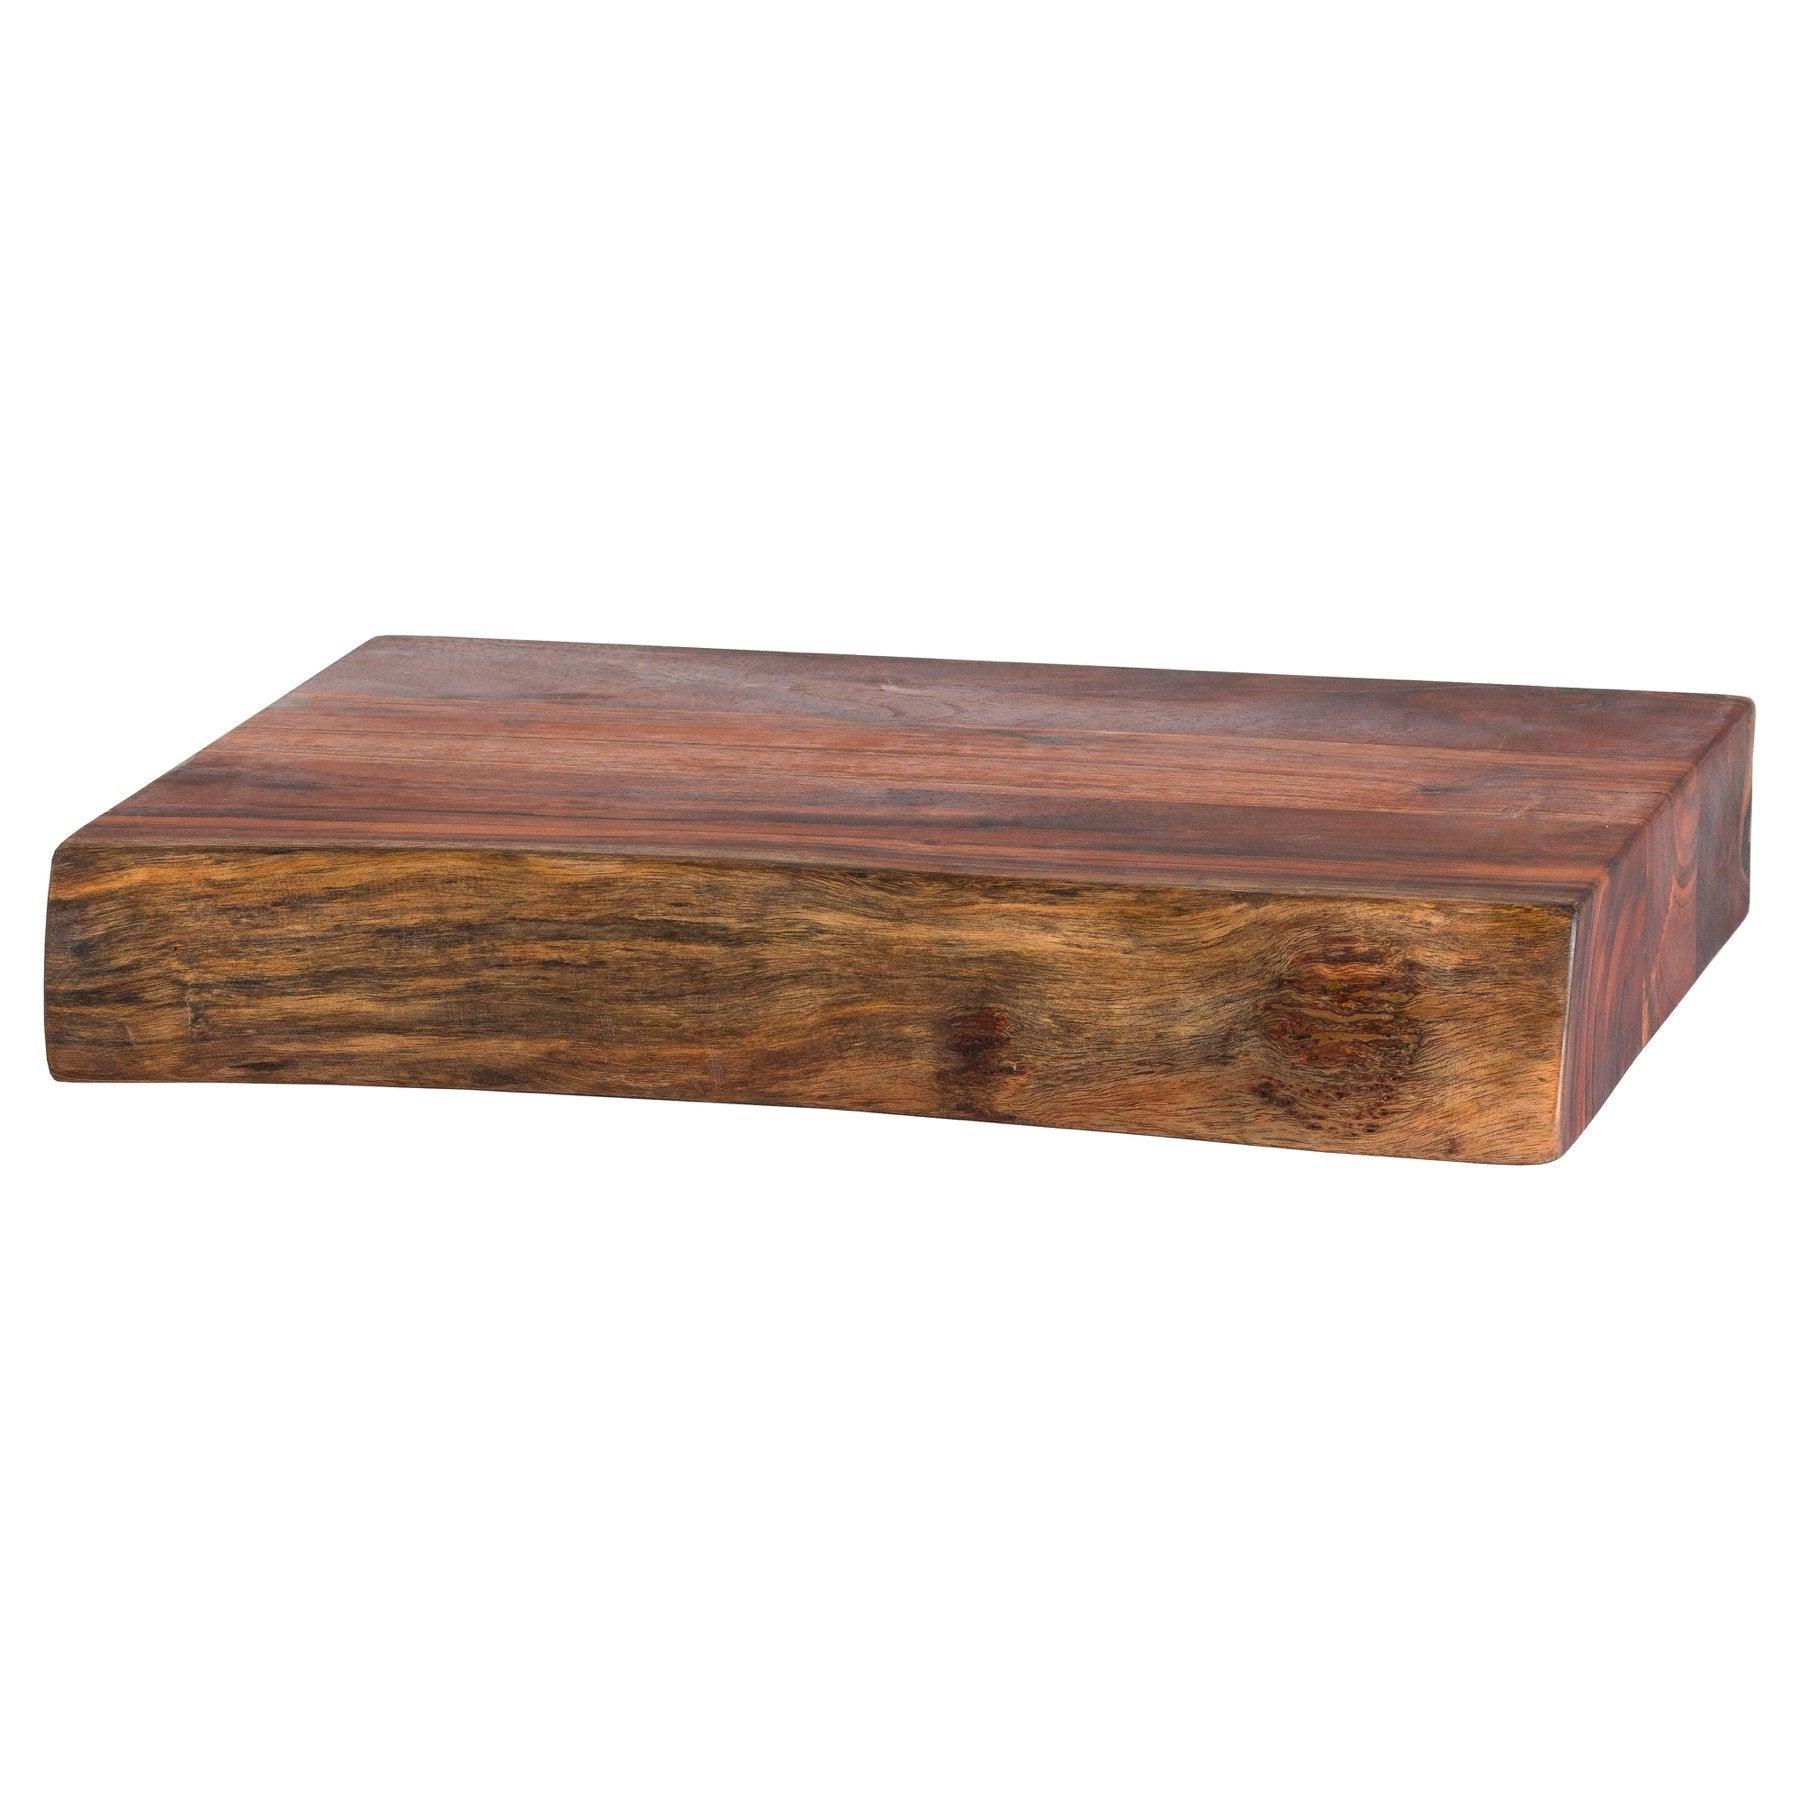 Live Edge Collection Pyman Chopping Board - Vookoo Lifestyle